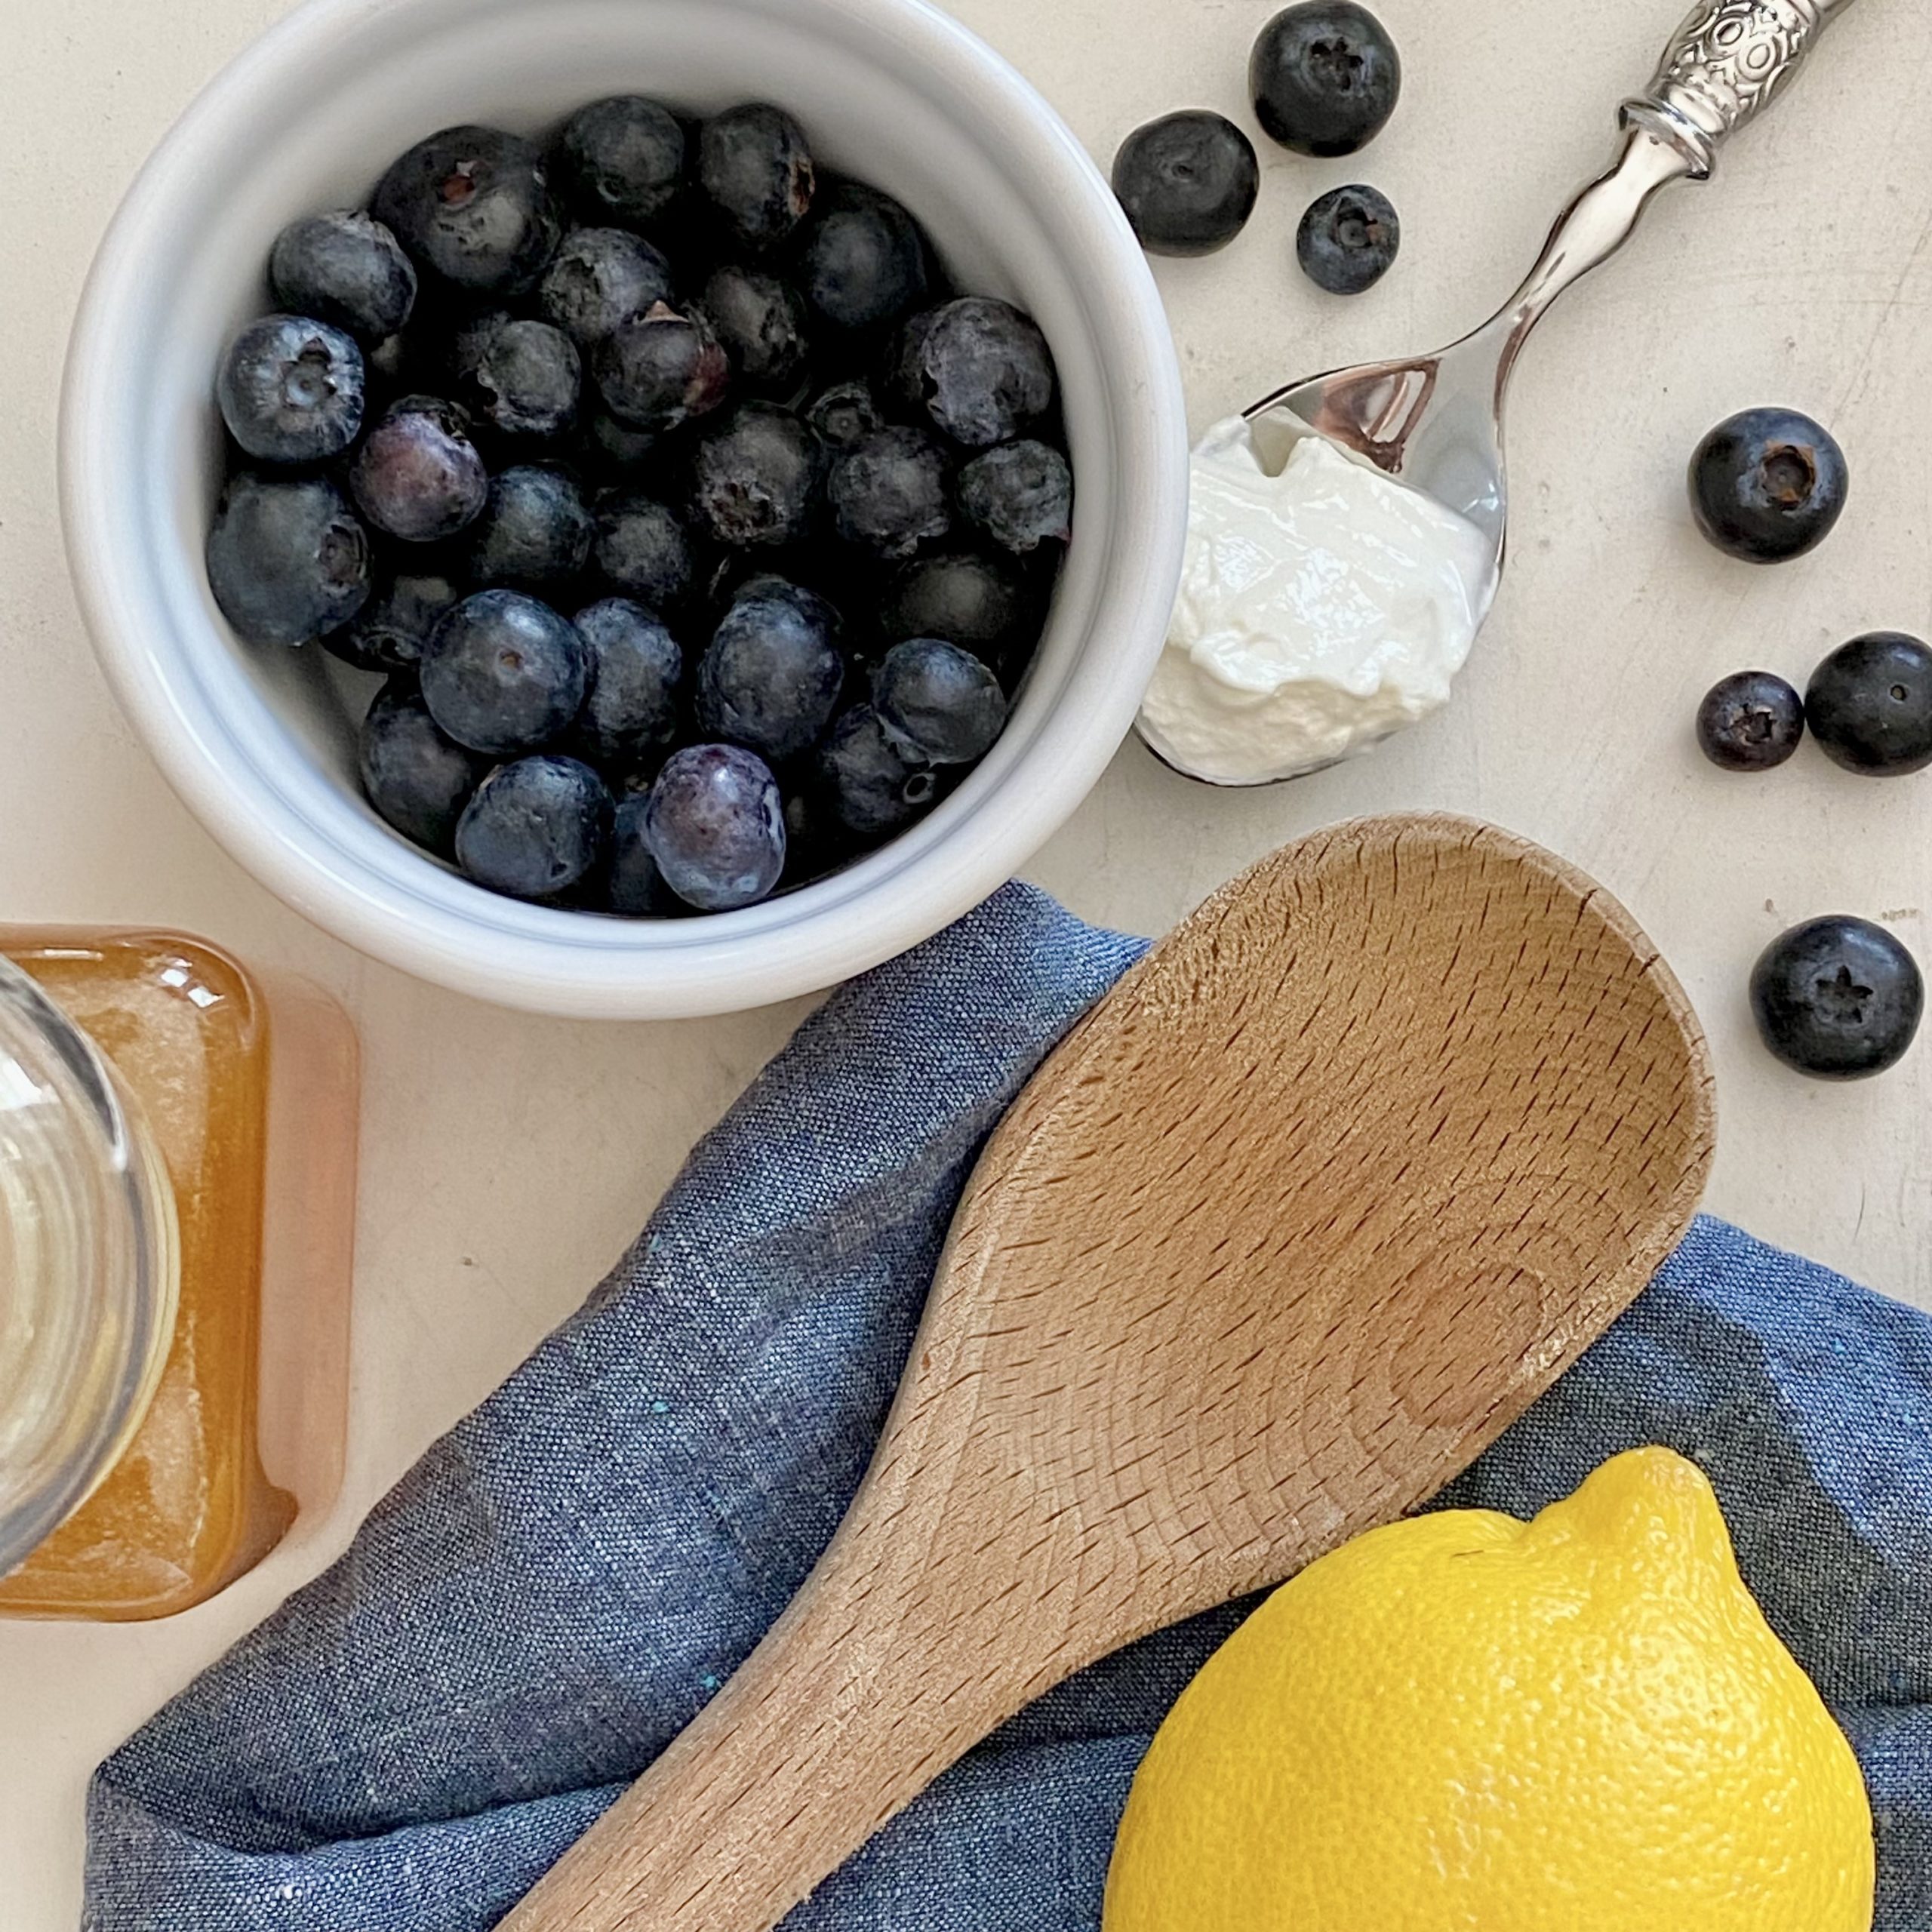 Flat-lay photo of blueberries, a lemon, honey, and yogurt with a wooden spoon and a blue towel.